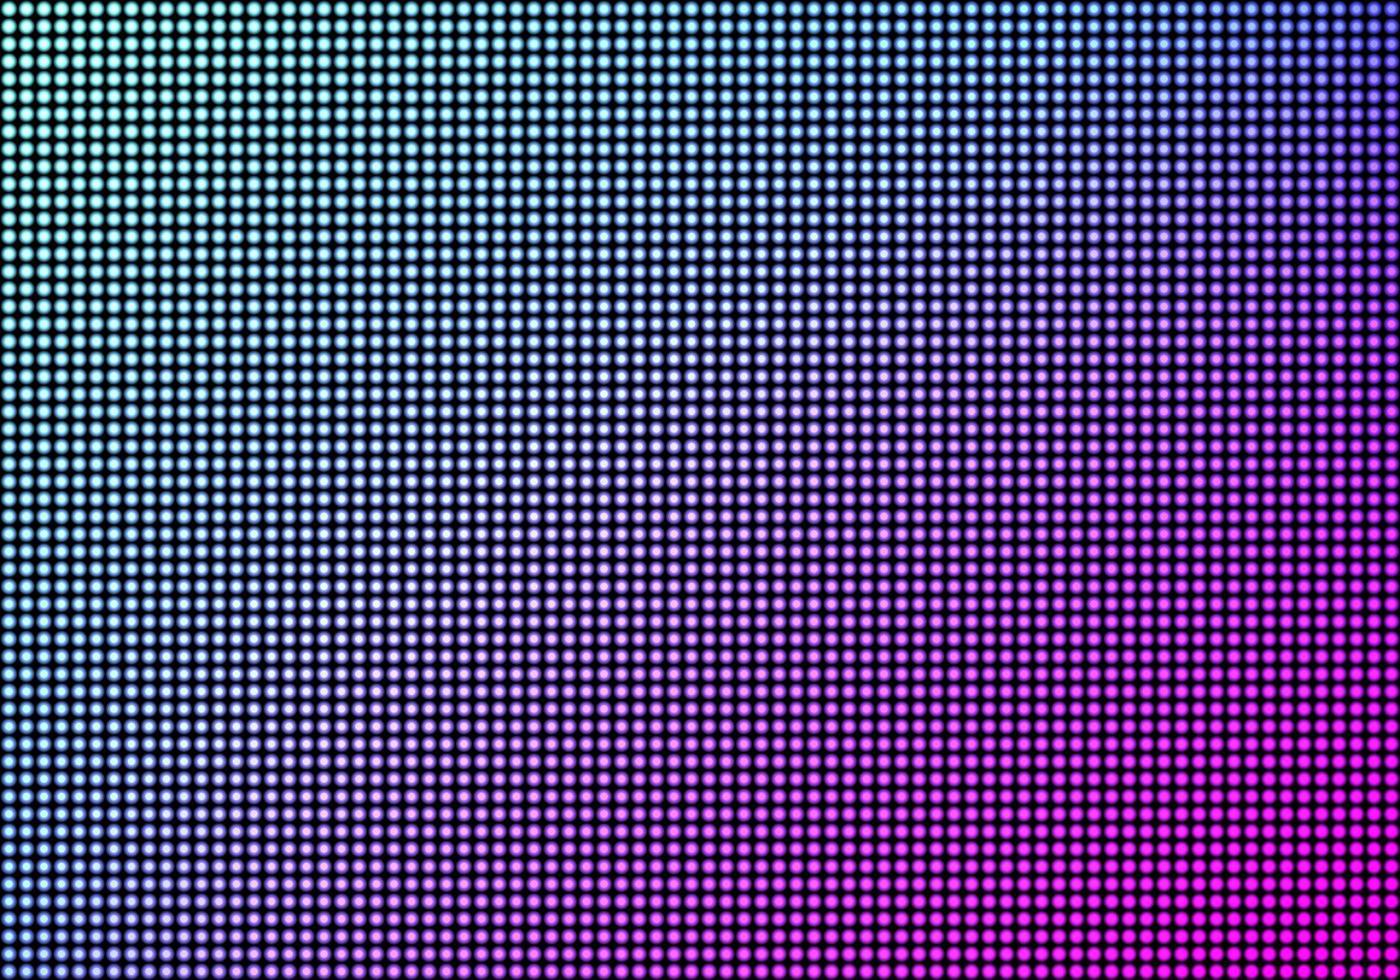 LED video wall screen texture background, display vector